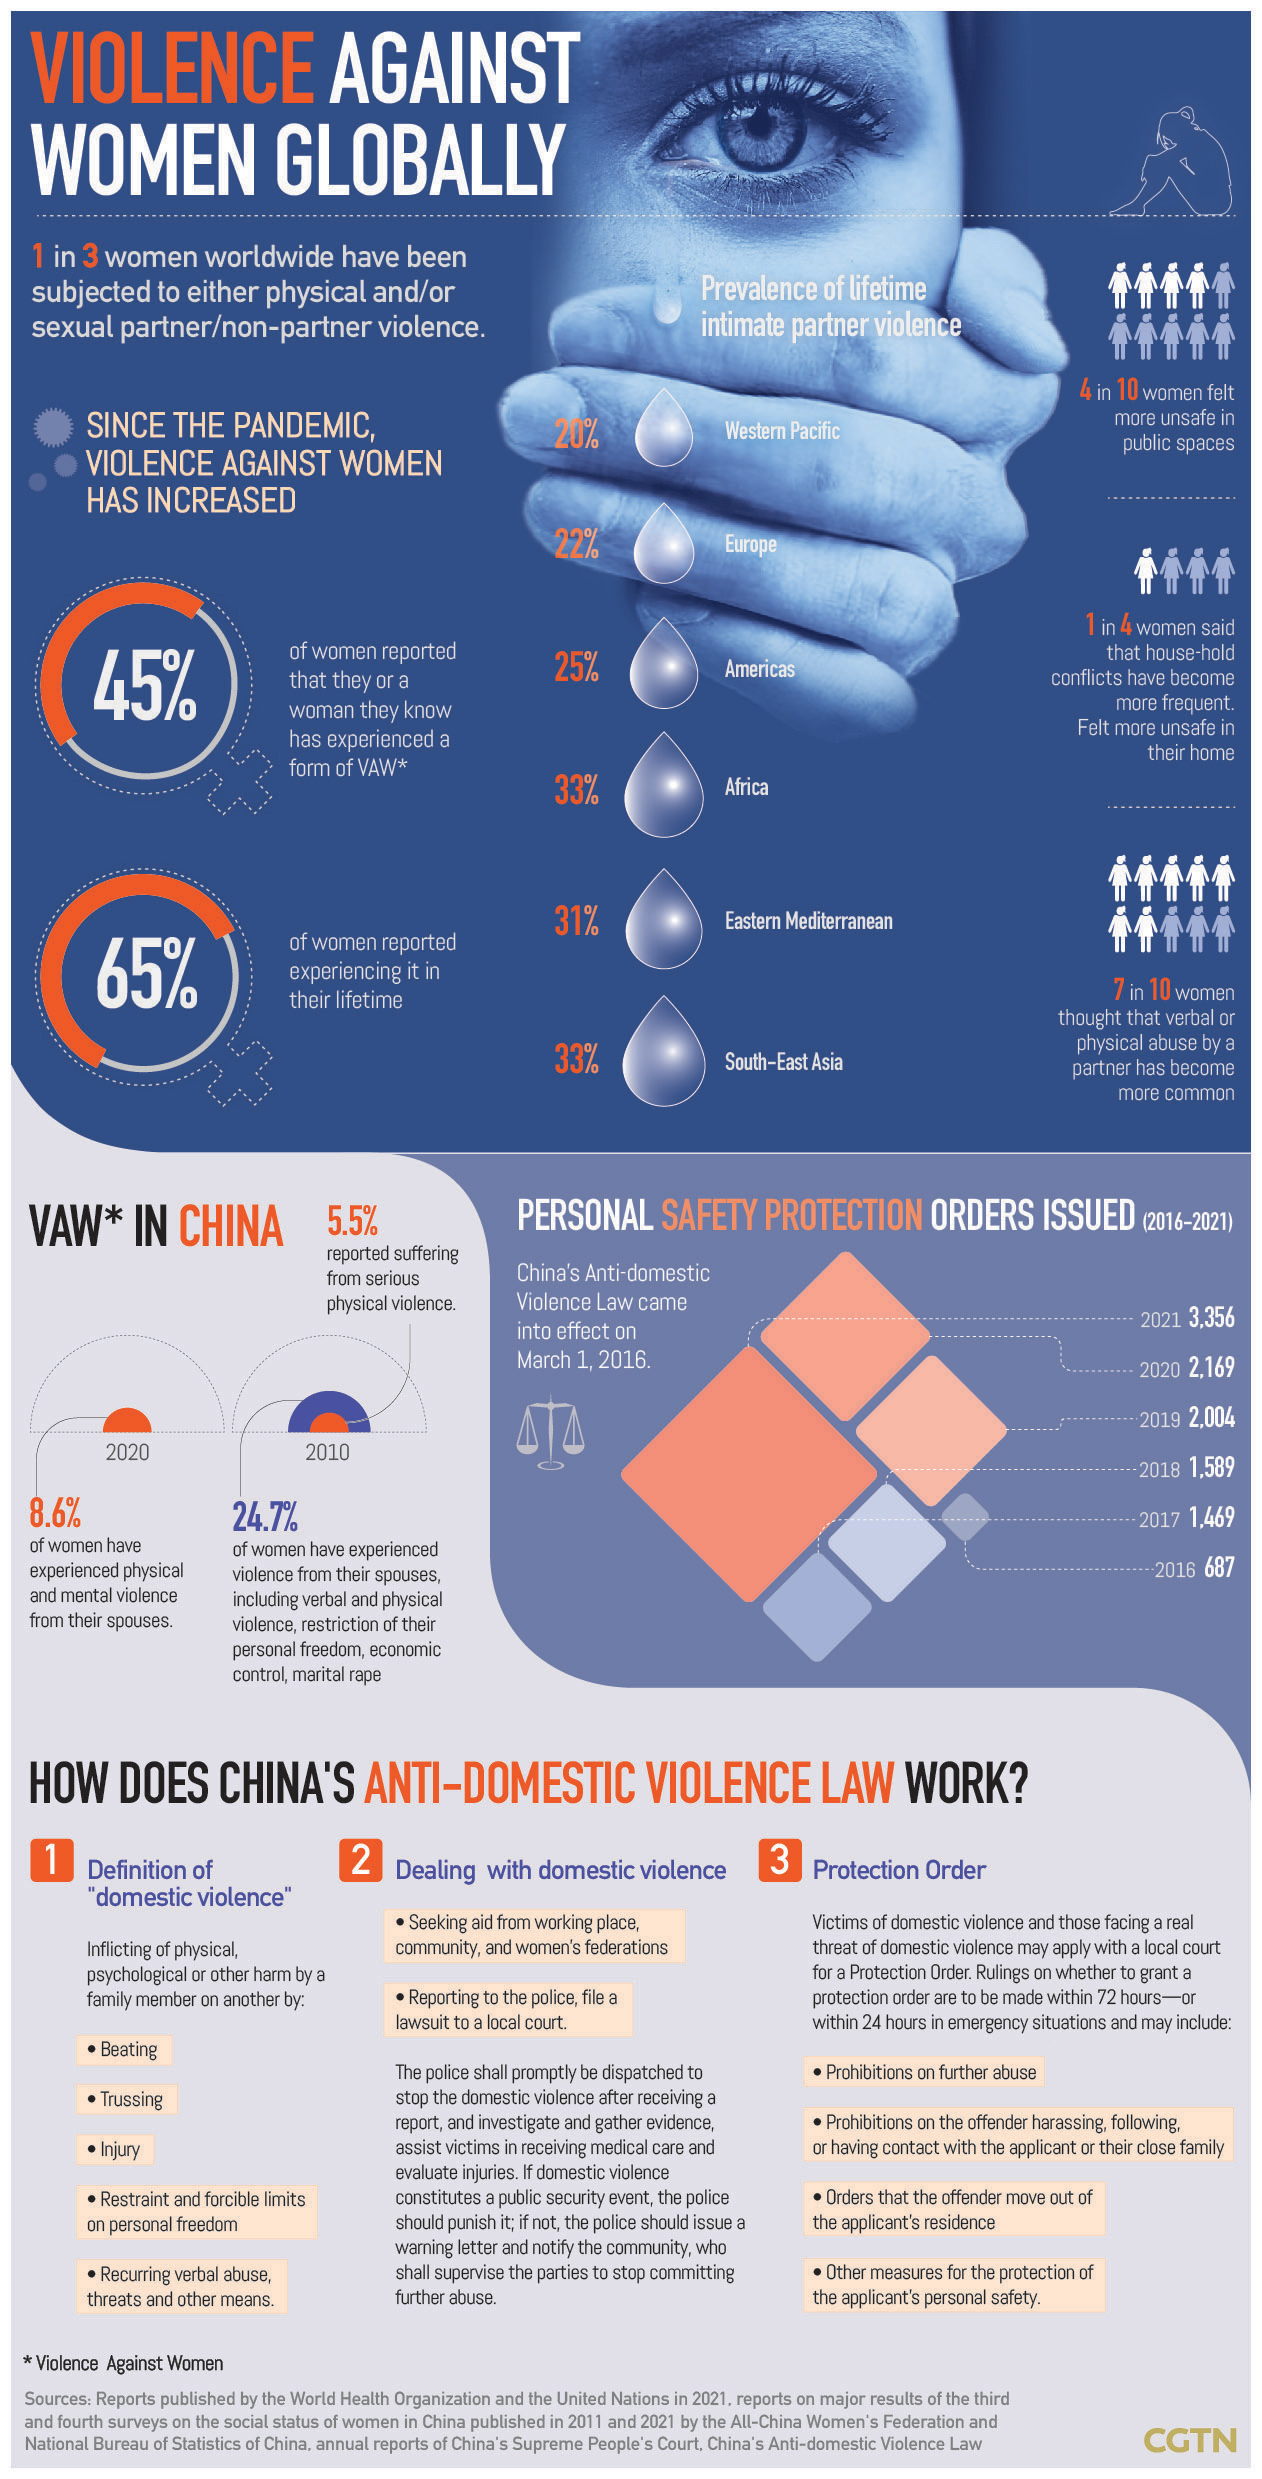 China's Anti-domestic Violence Law and its role in protecting women